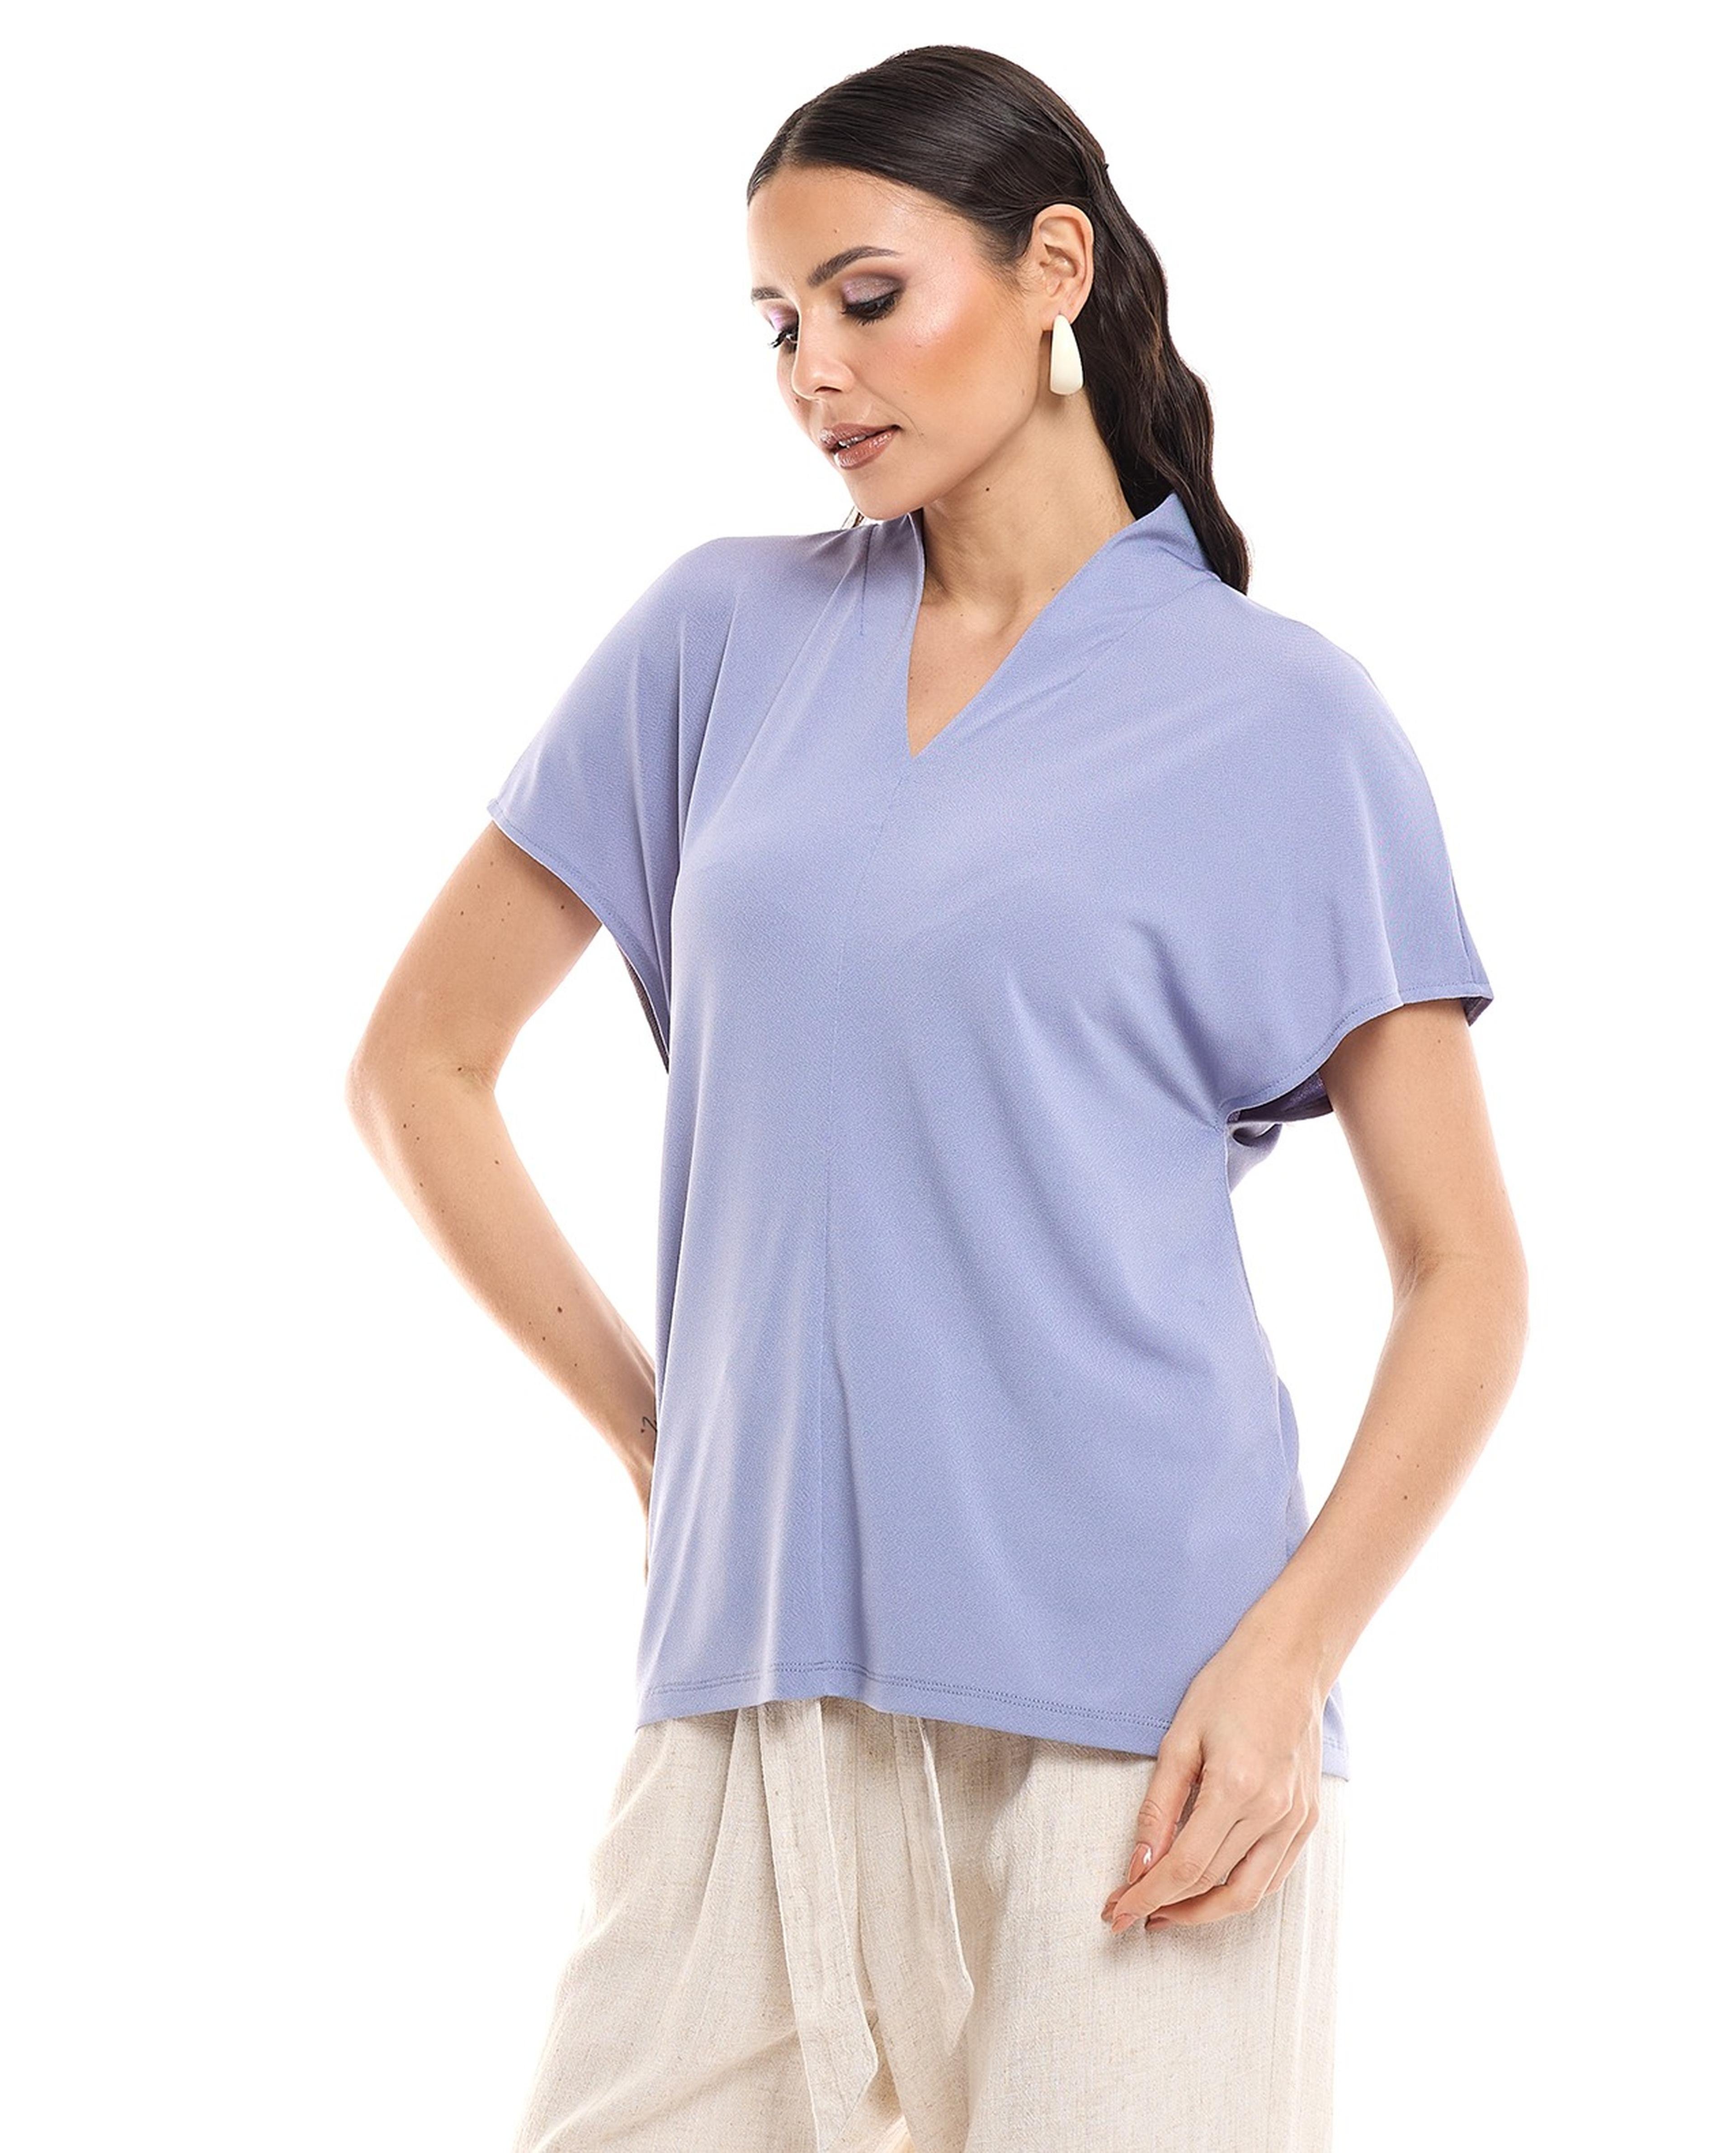 Solid Top with High Neck and Short Sleeves